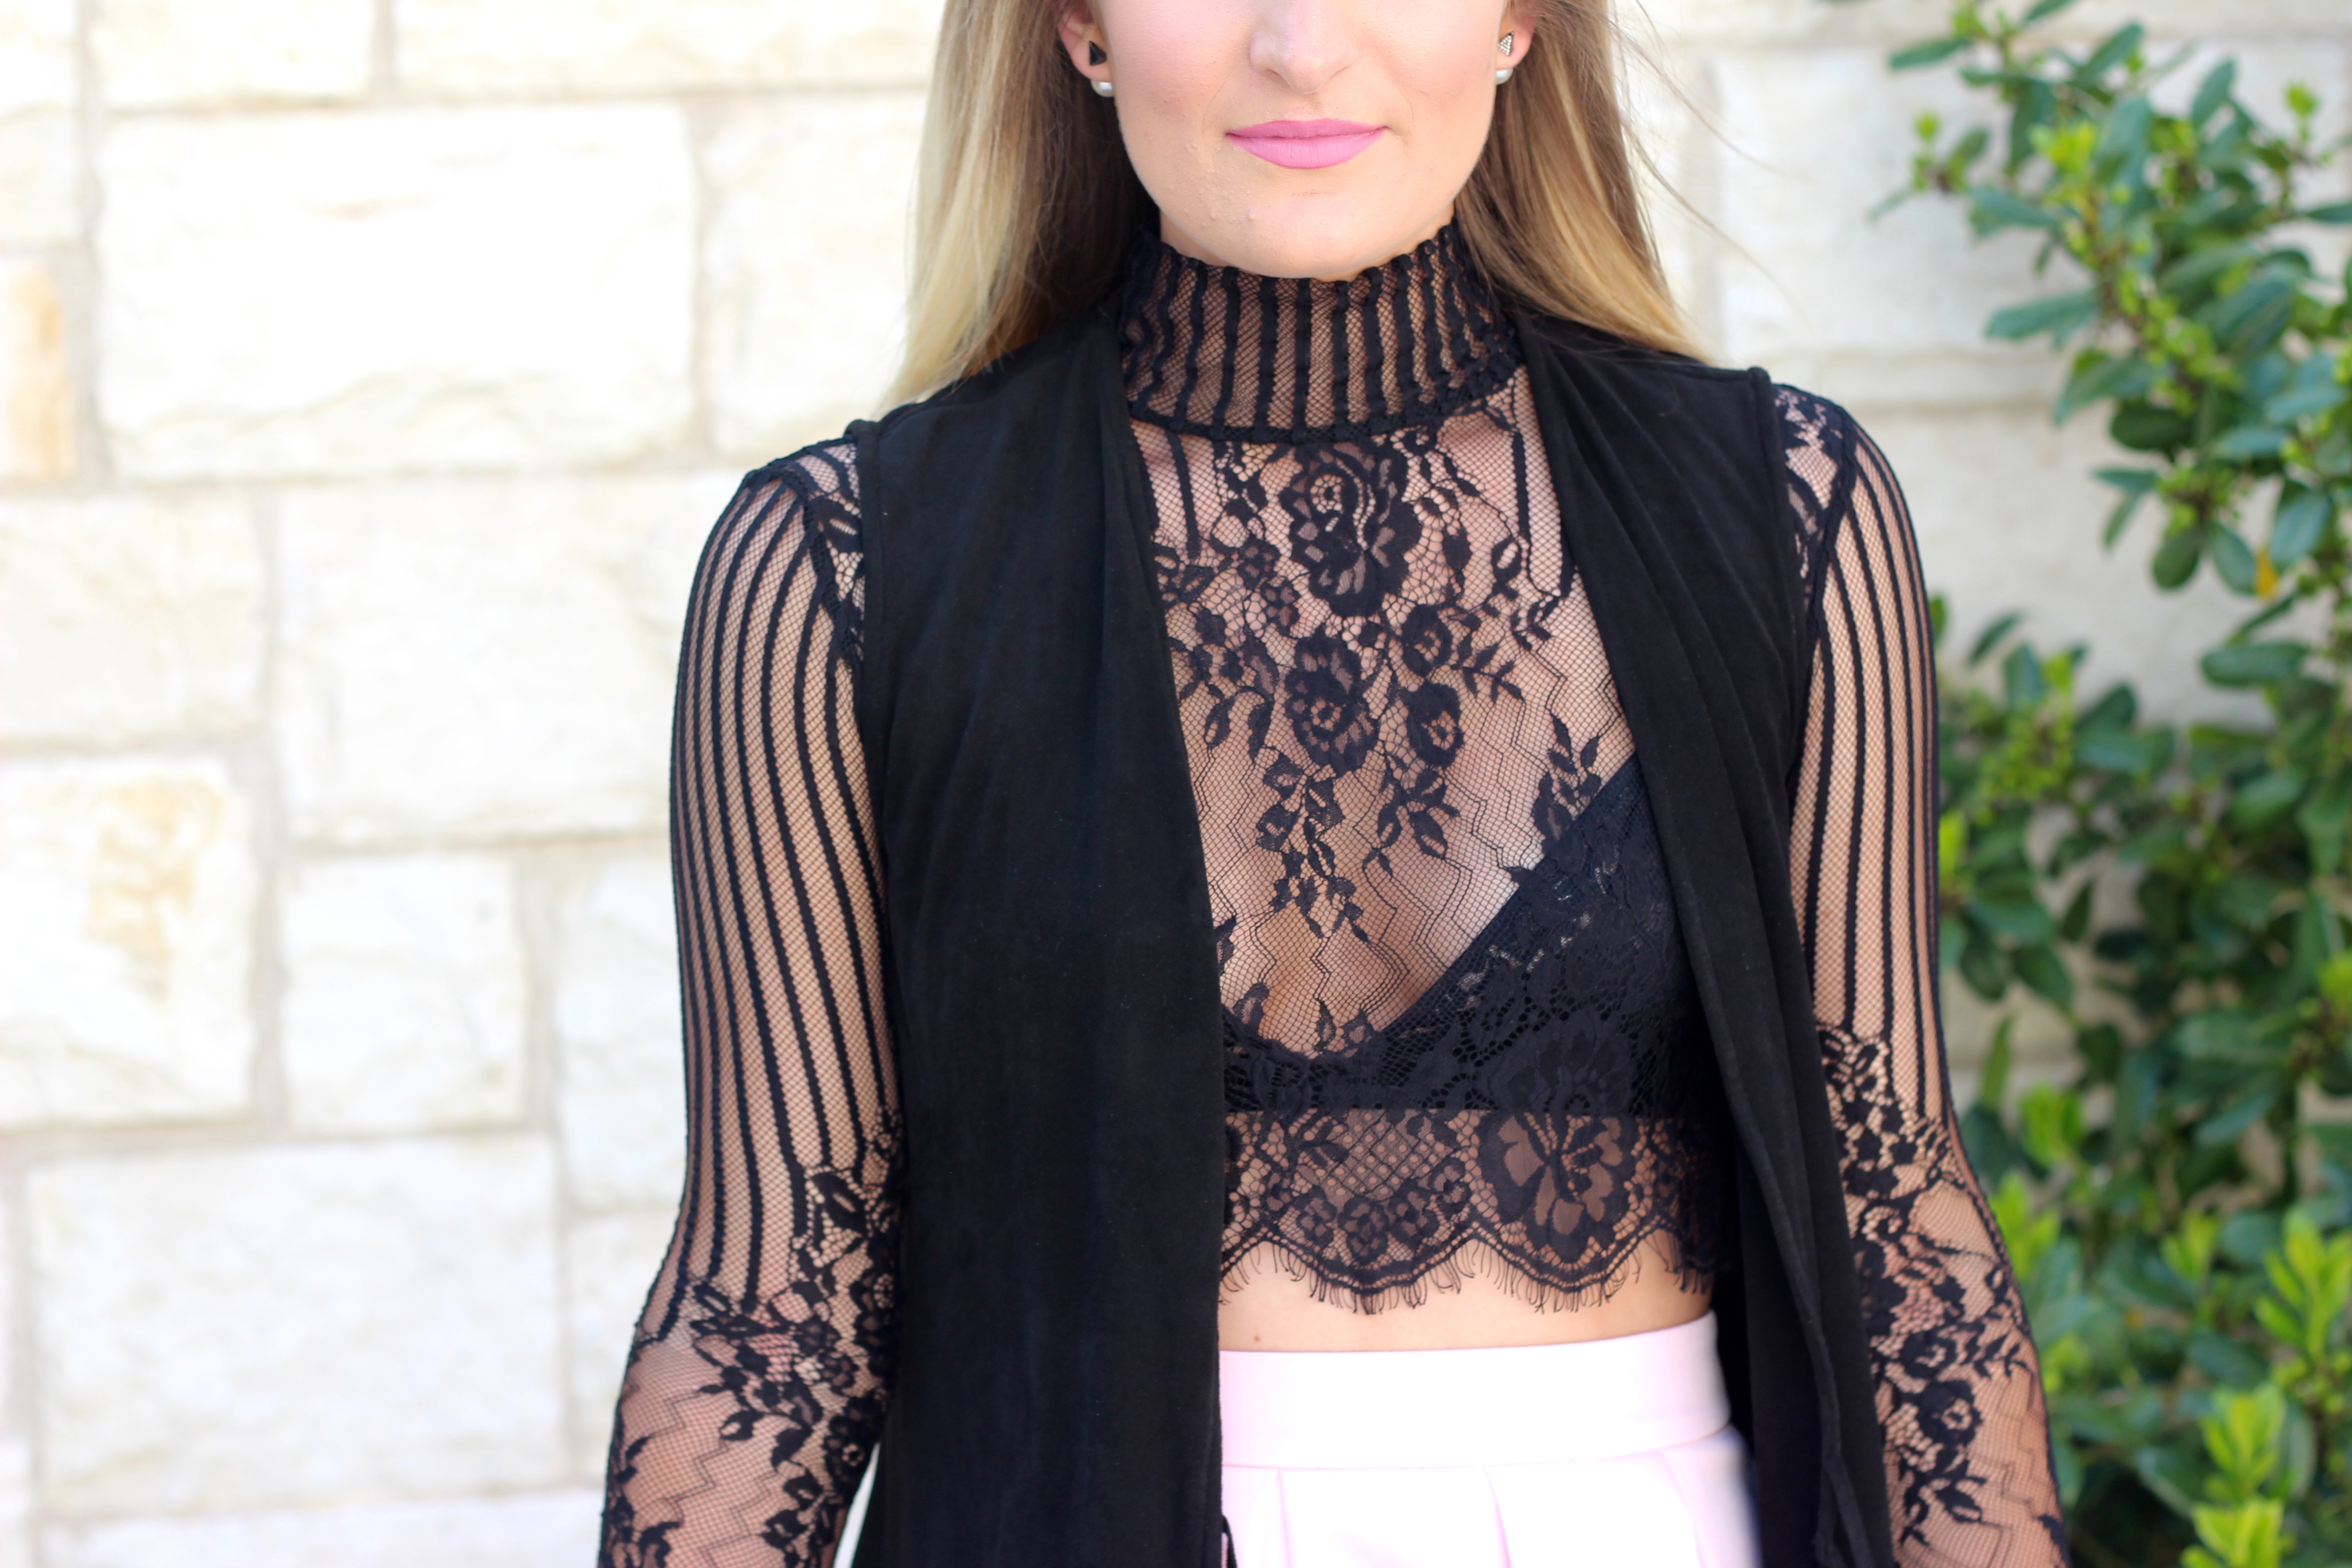 lace crop top detailing from asos - Lingerie Outfit By Day by popular Texas fashion blogger Audrey Madison Stowe